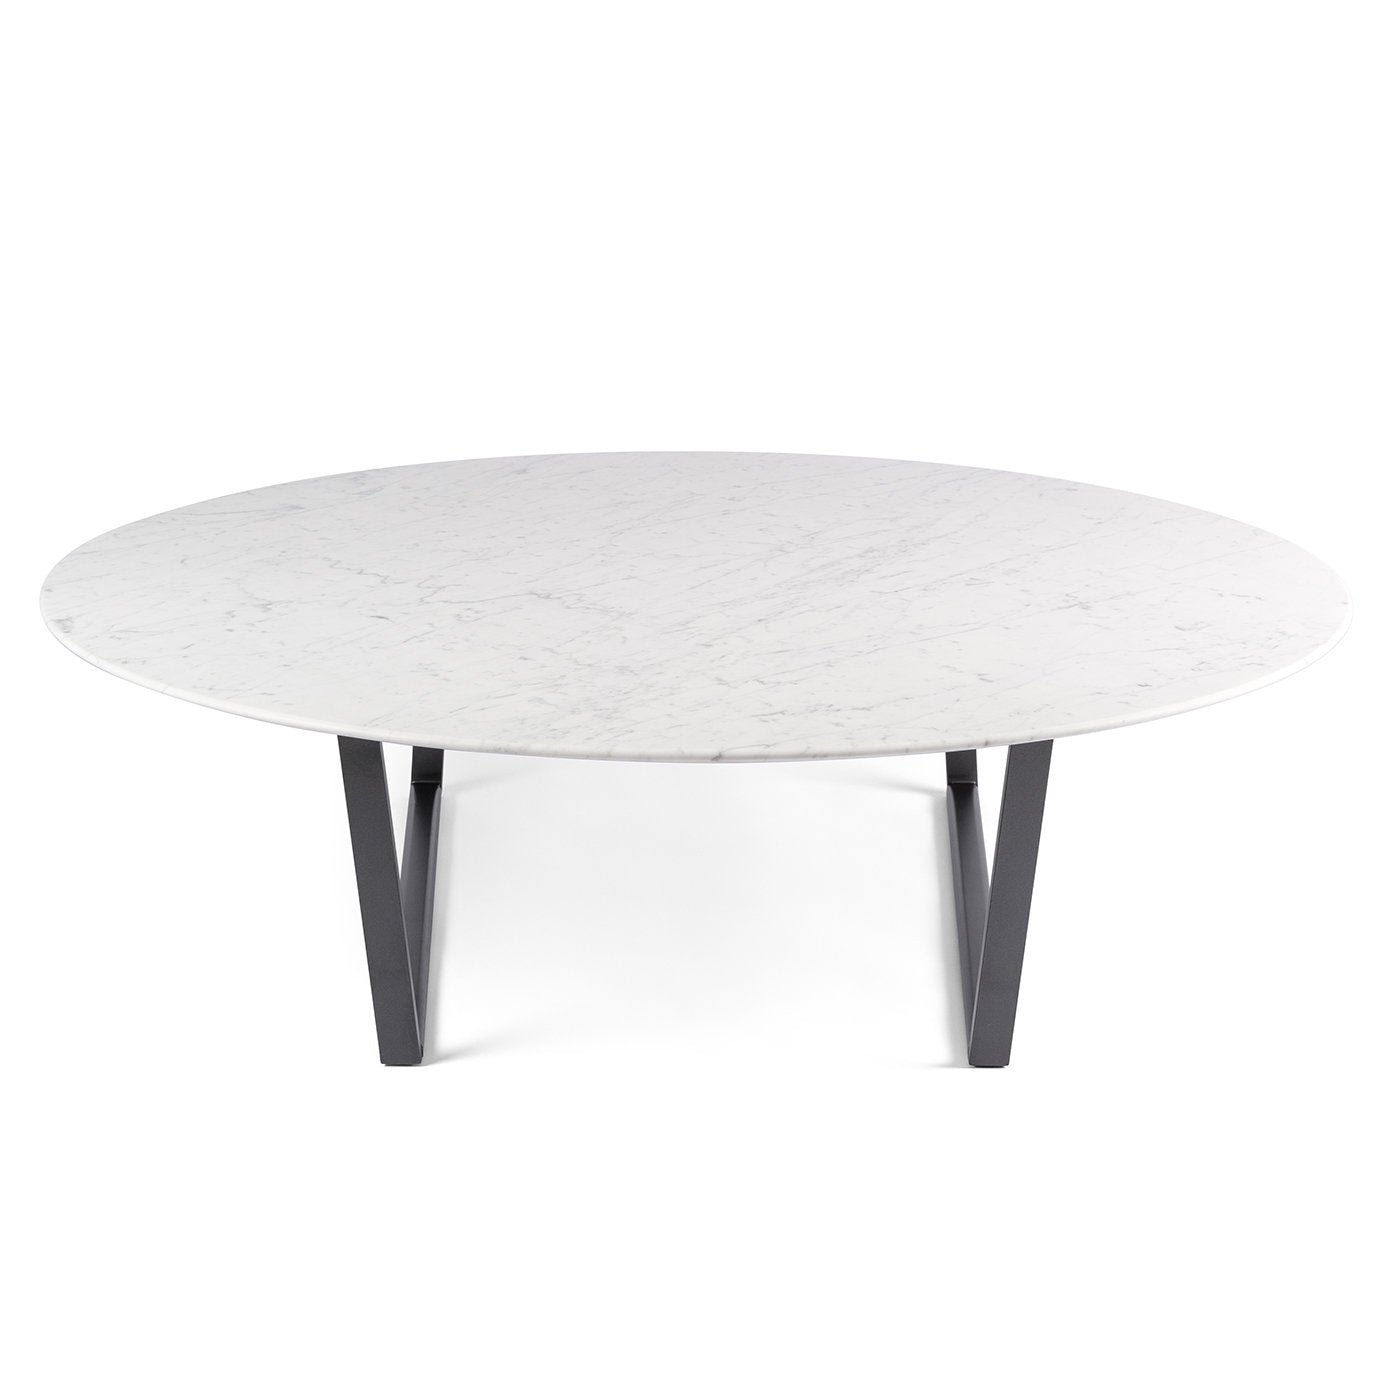 Tall Dritto Coffee Table by Pietro Lissoni - Alternative view 1